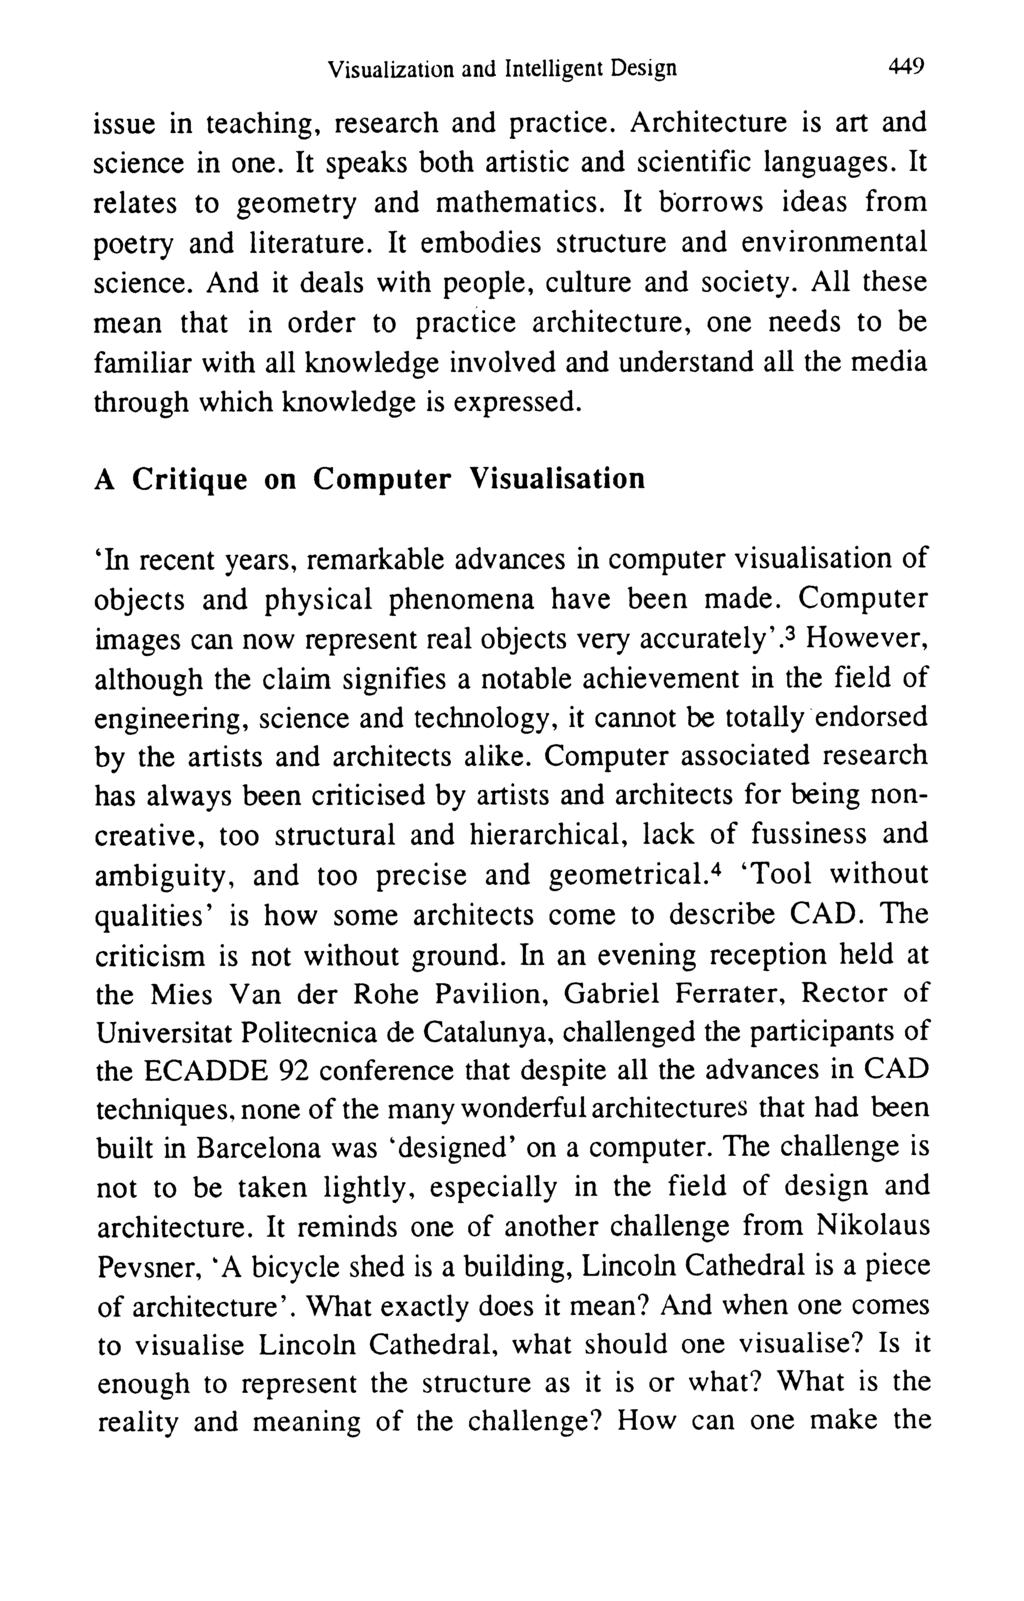 Visualization and Intelligent Design 449 issue in teaching, research and practice. Architecture is art and science in one. It speaks both artistic and scientific languages.